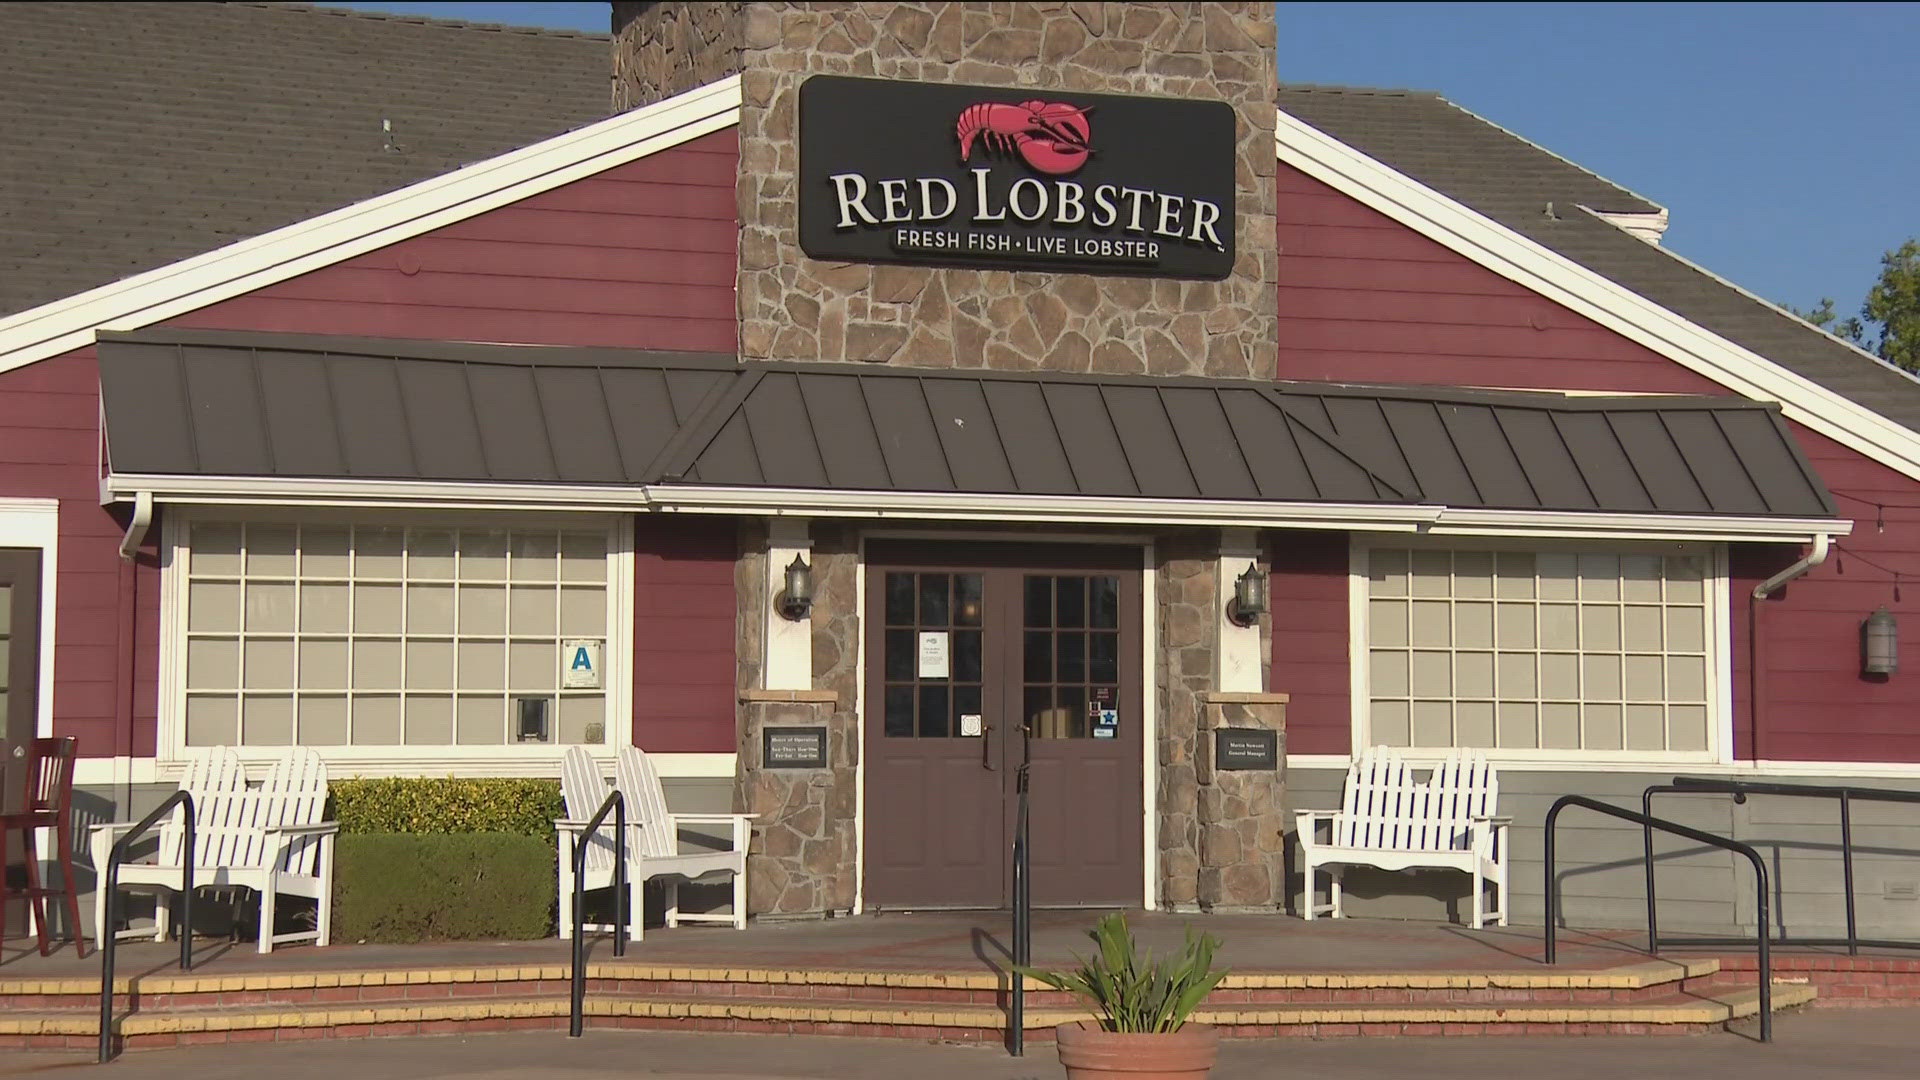 The restaurant in Mira Mesa is one of up to 120 location closures throughout the U.S.